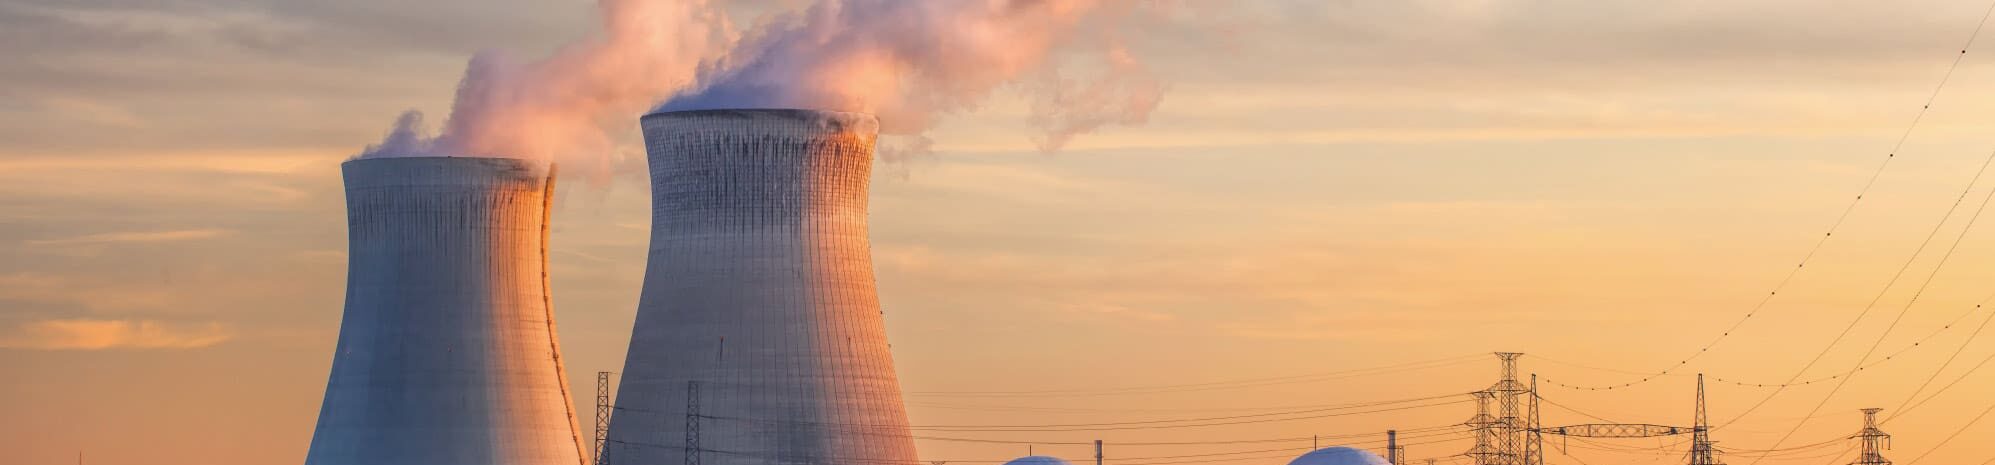 Nuclear cooling towers against a sunset background